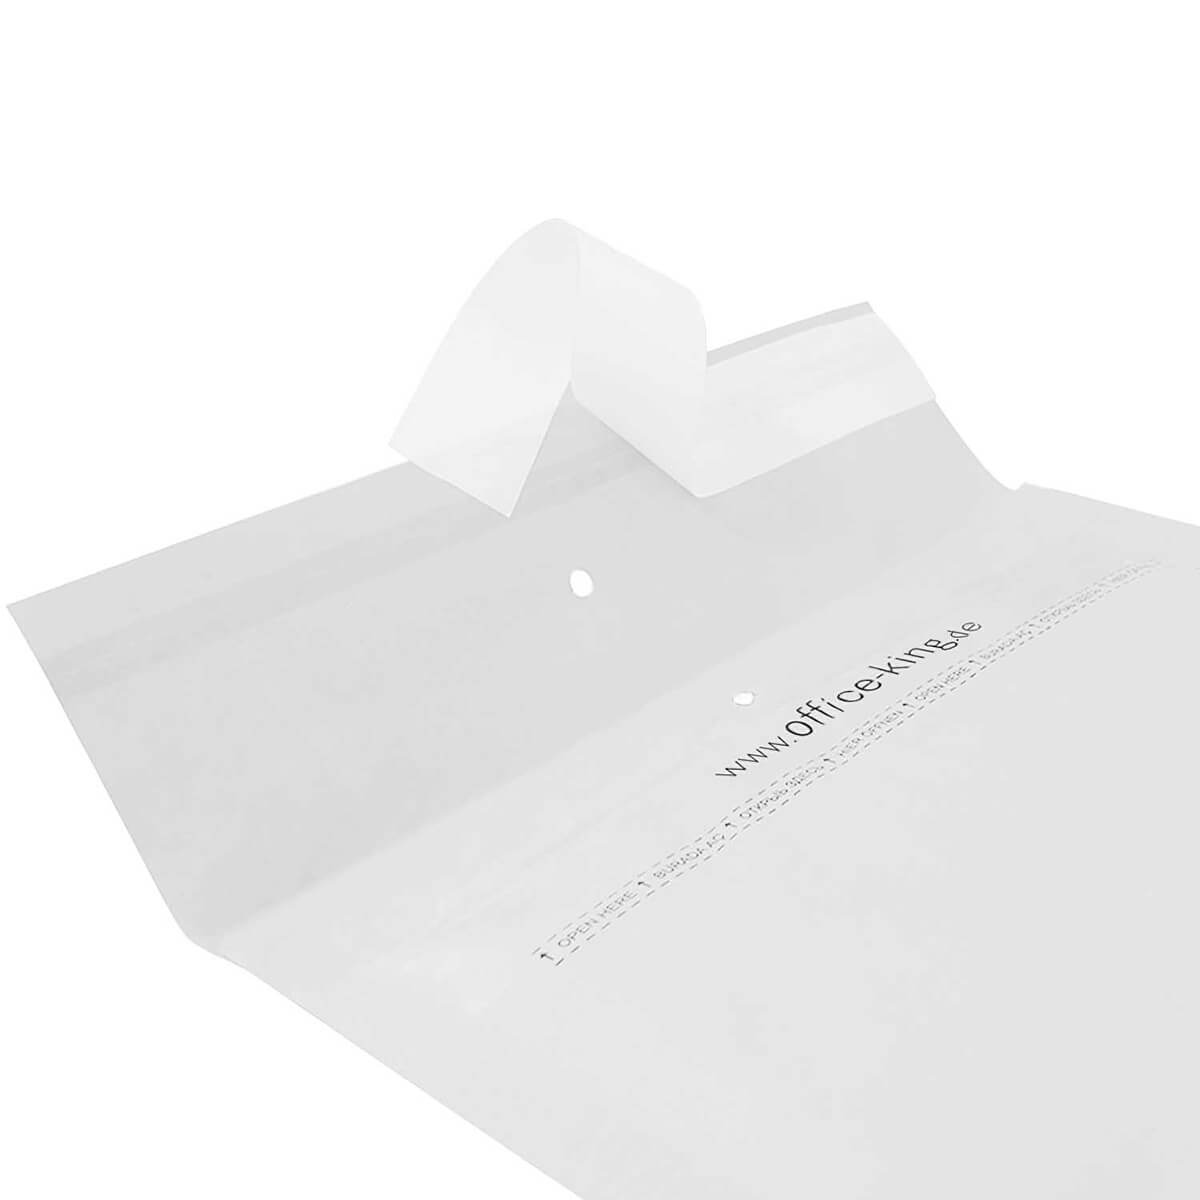 10x G7 Bubble mailers white 250 x 350 mm - officeking